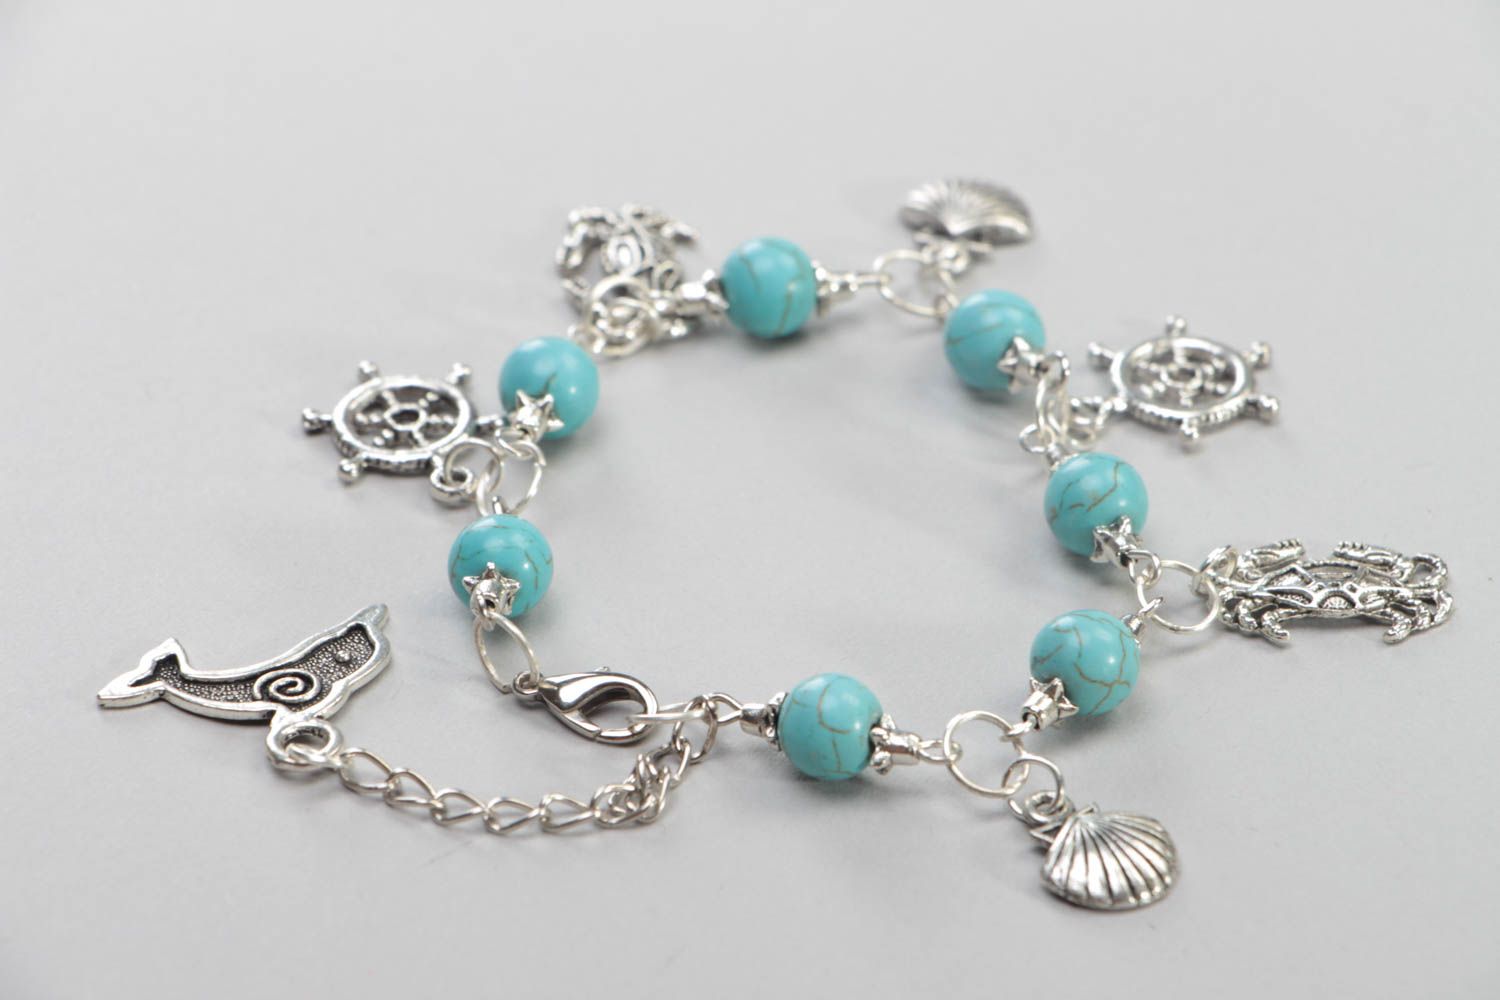 Handmade turquoise bracelet unusual accessory with metal charms cute jewelry photo 4